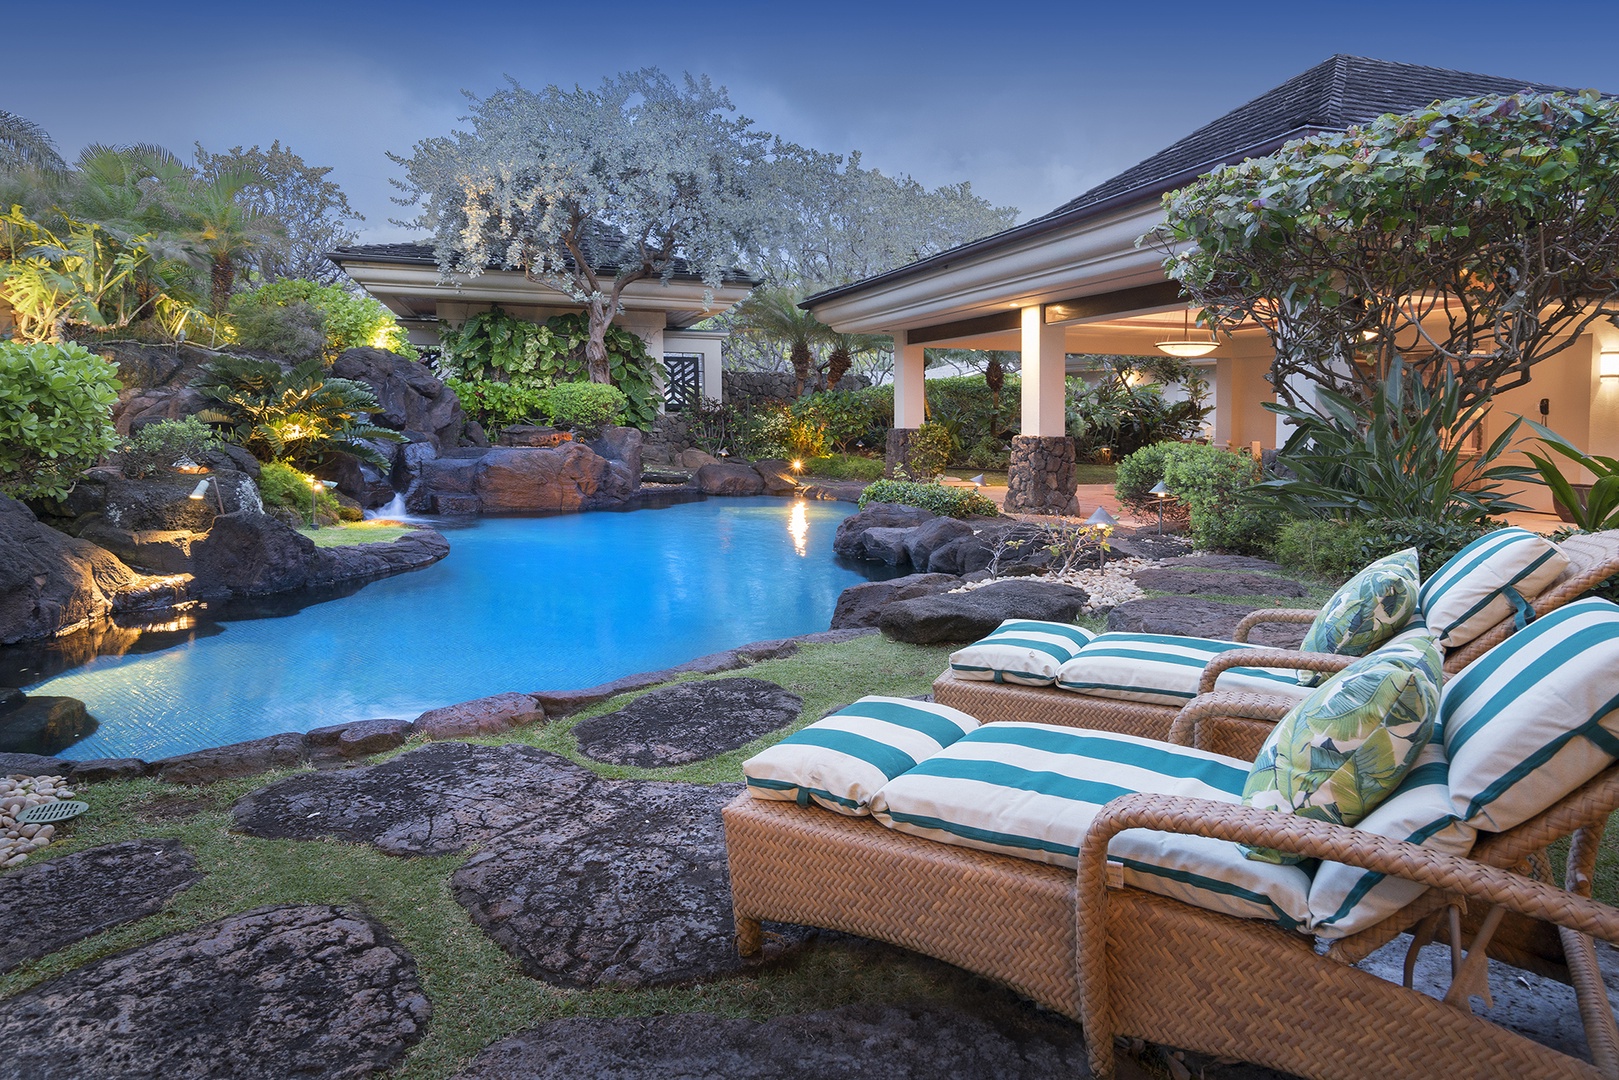 Kailua Vacation Rentals, Kailua's Kai Moena Estate - Tropical lagoon style pool and spa with natural rocks and cascading waterfalls.